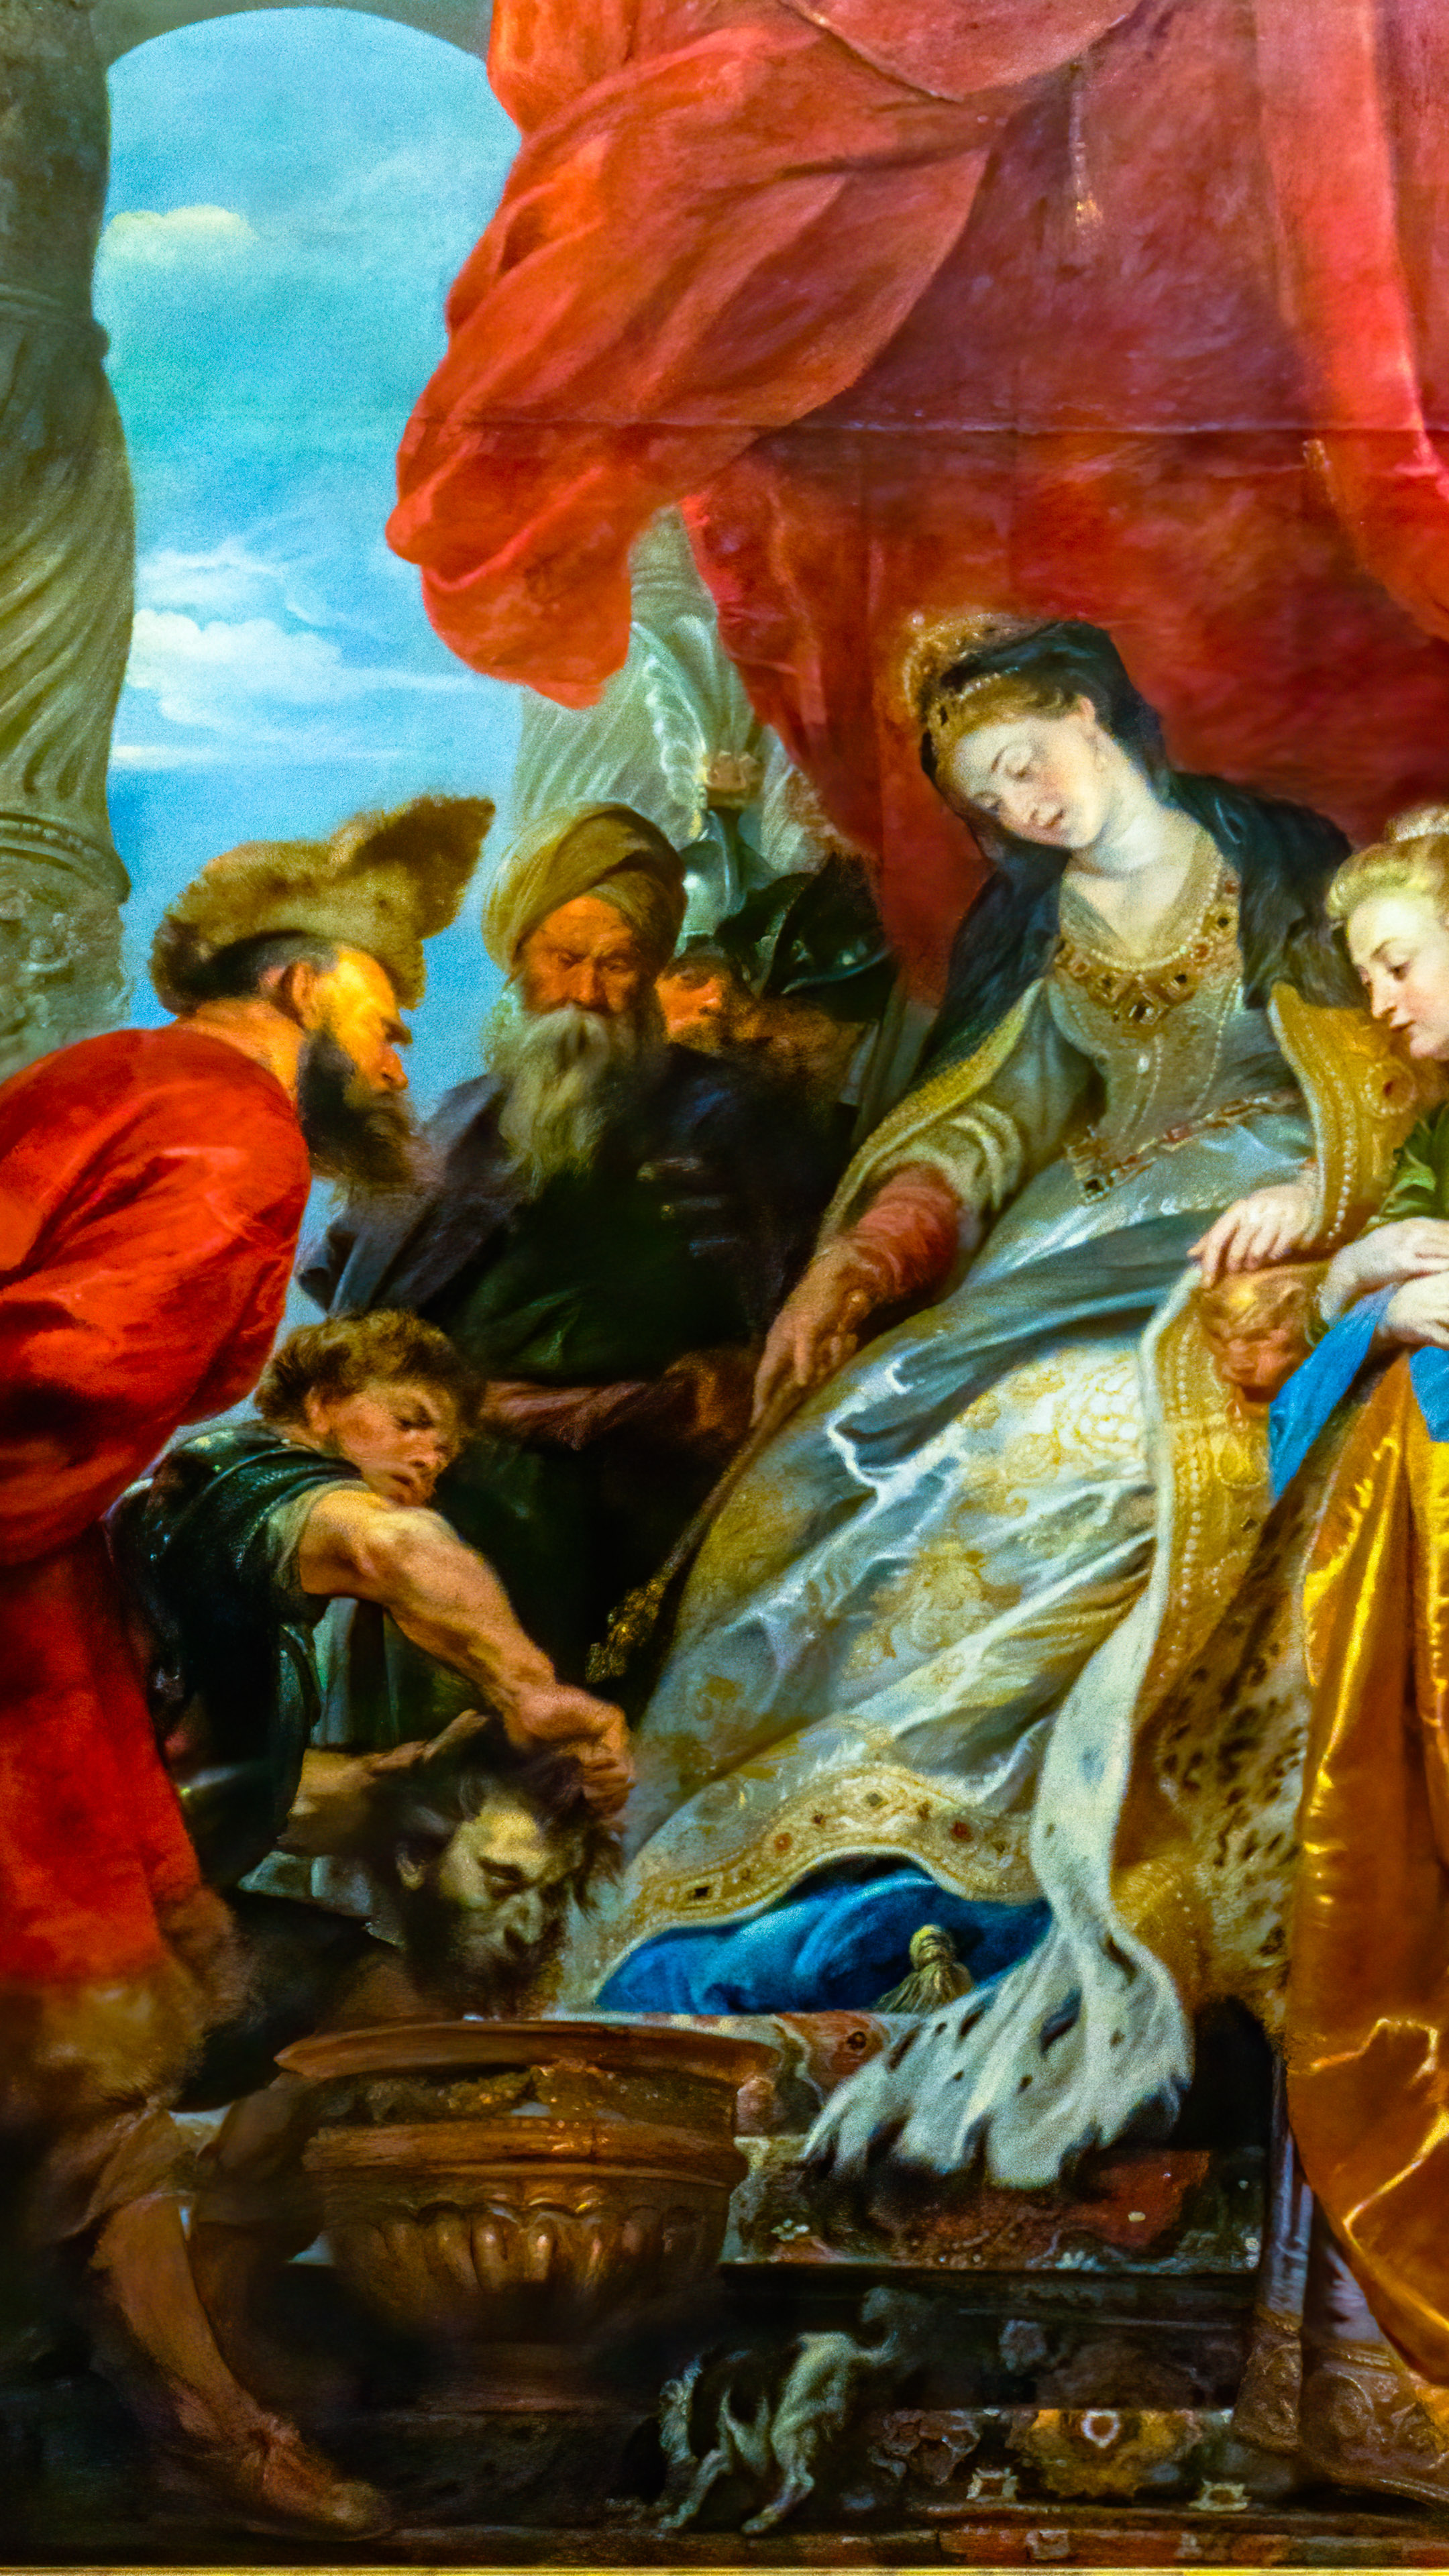 Get inspired with the Rubens painting mobile wallpaper and admire the drama and sensuality of his Baroque art, with monumental forms and dynamic effects.